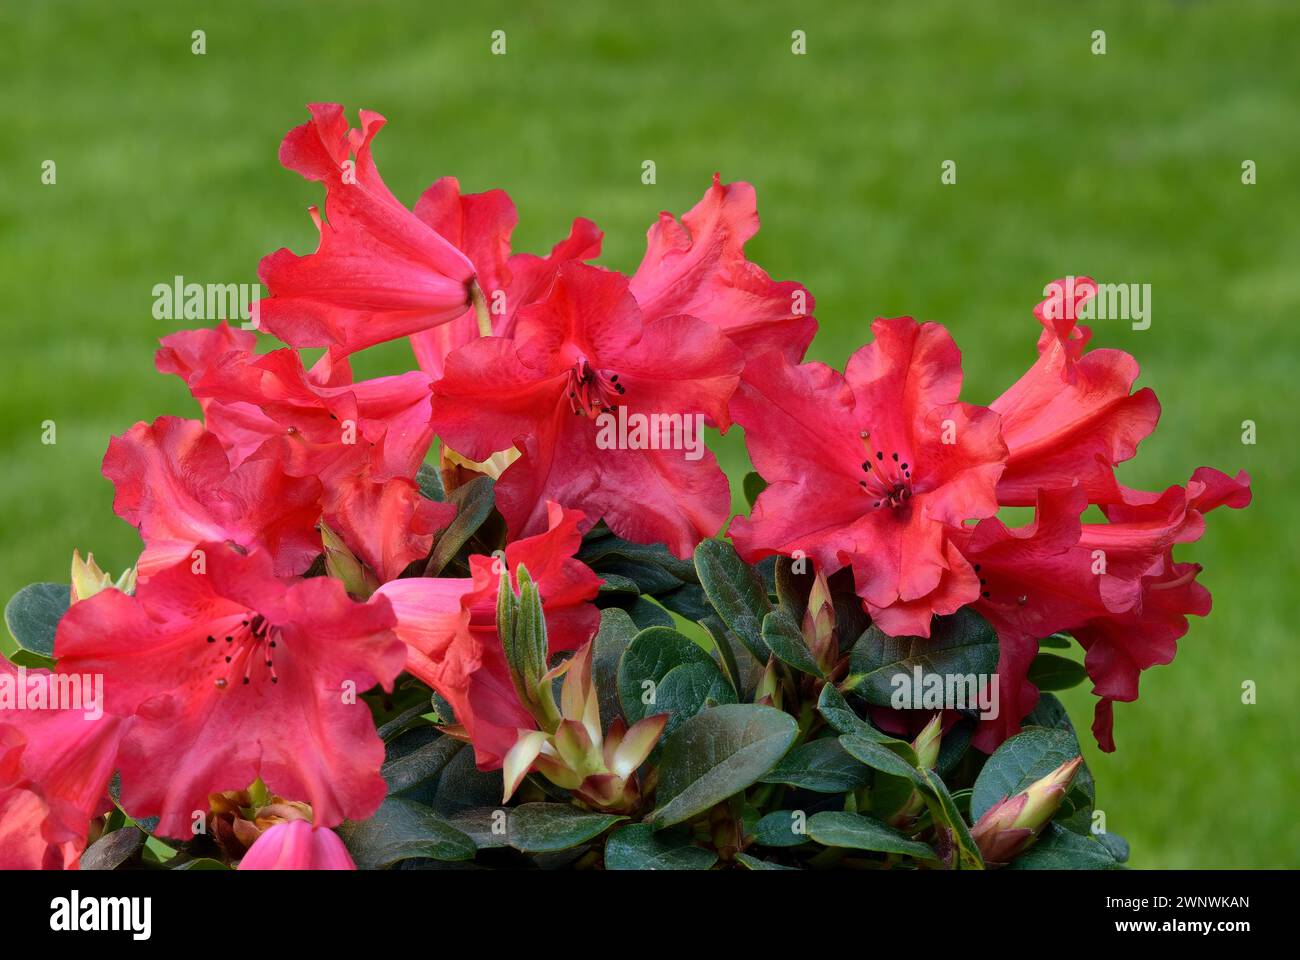 Rhododendron Scarlet Wonder red flowers with buds, full bloom, close up. Ornamental plant. Blurred natural green background. Trencin, Slovakia Stock Photo